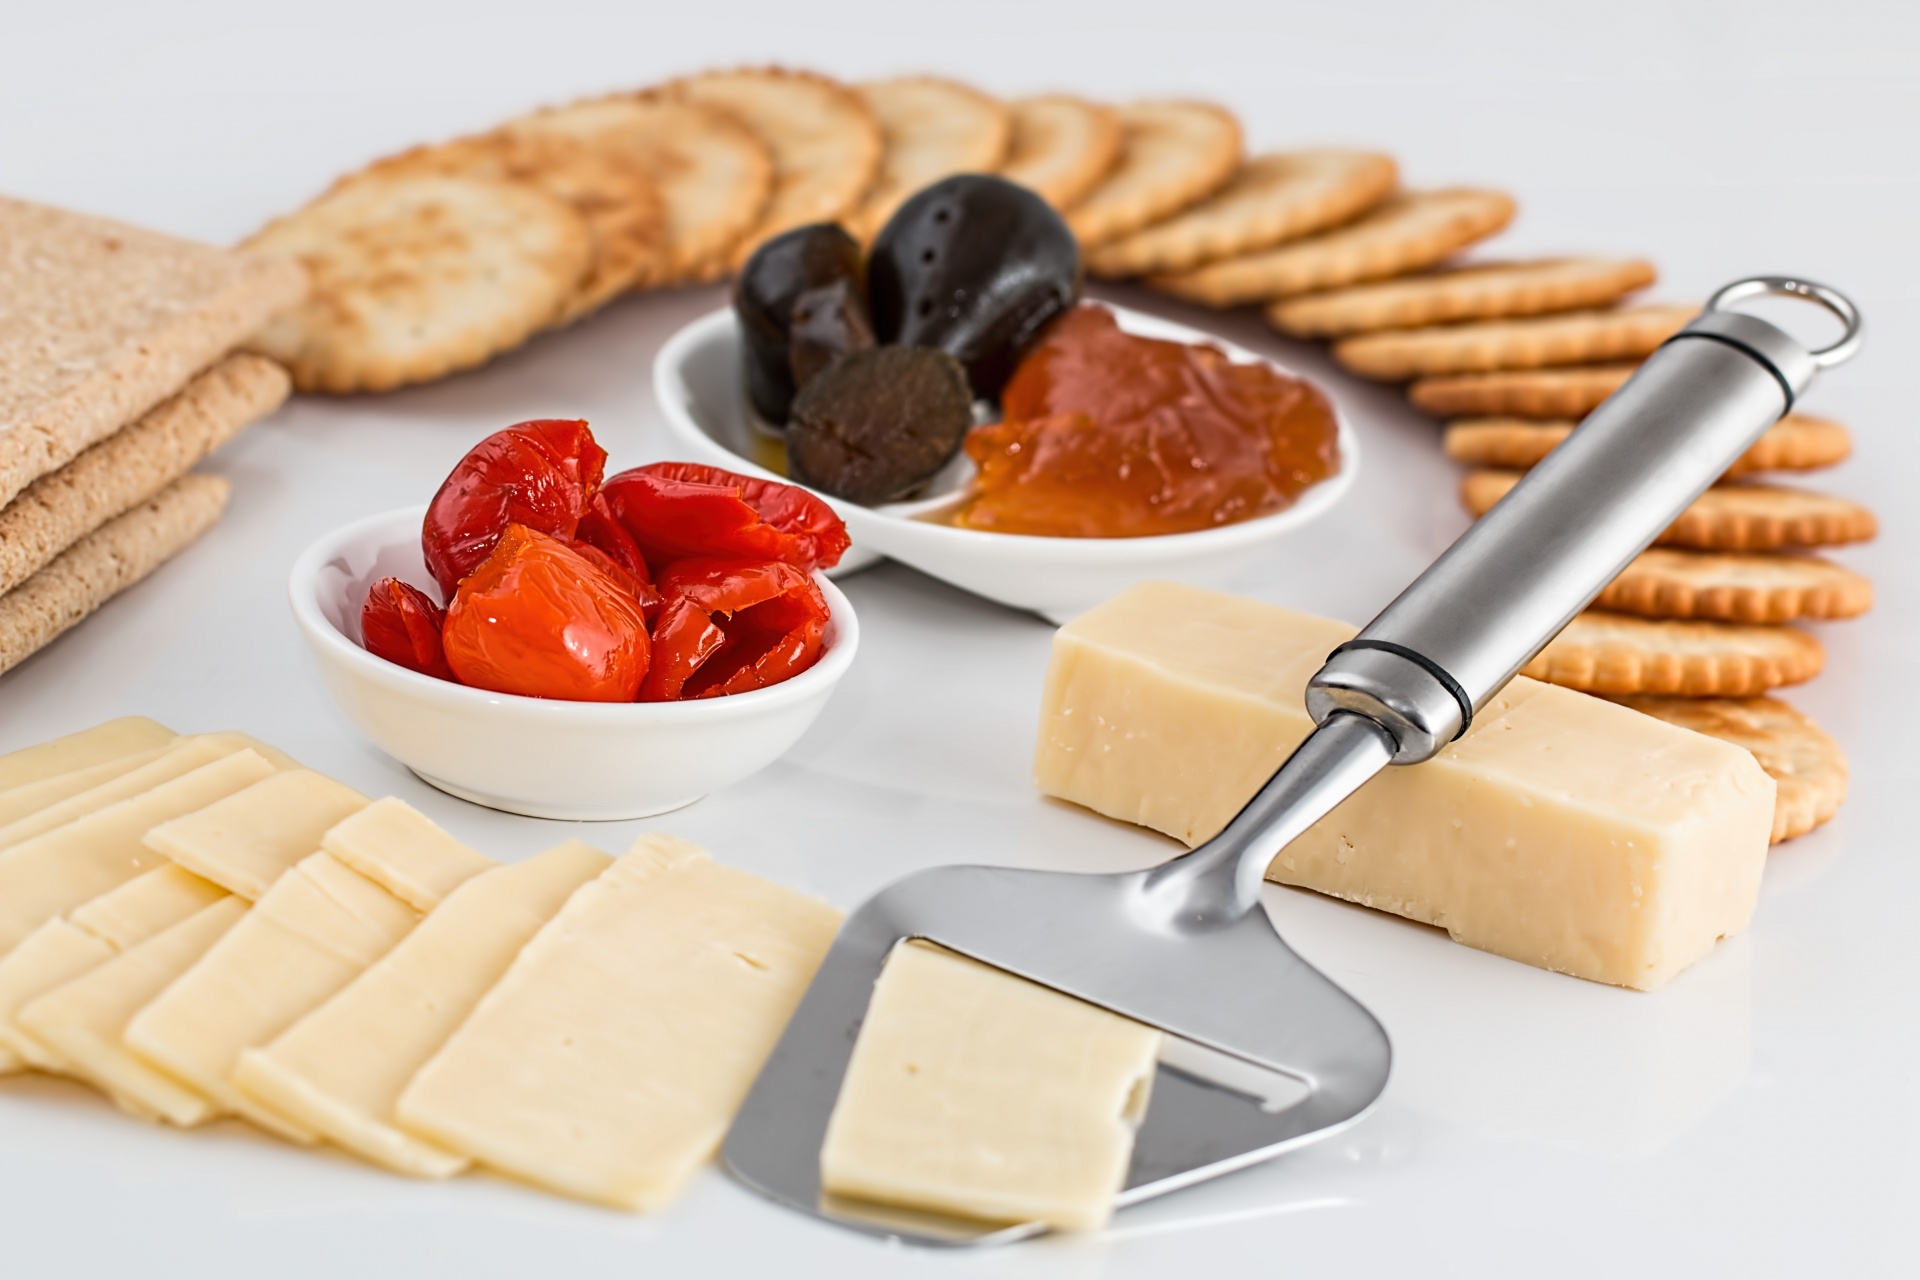 cheese slicer crackers appetizers free photo